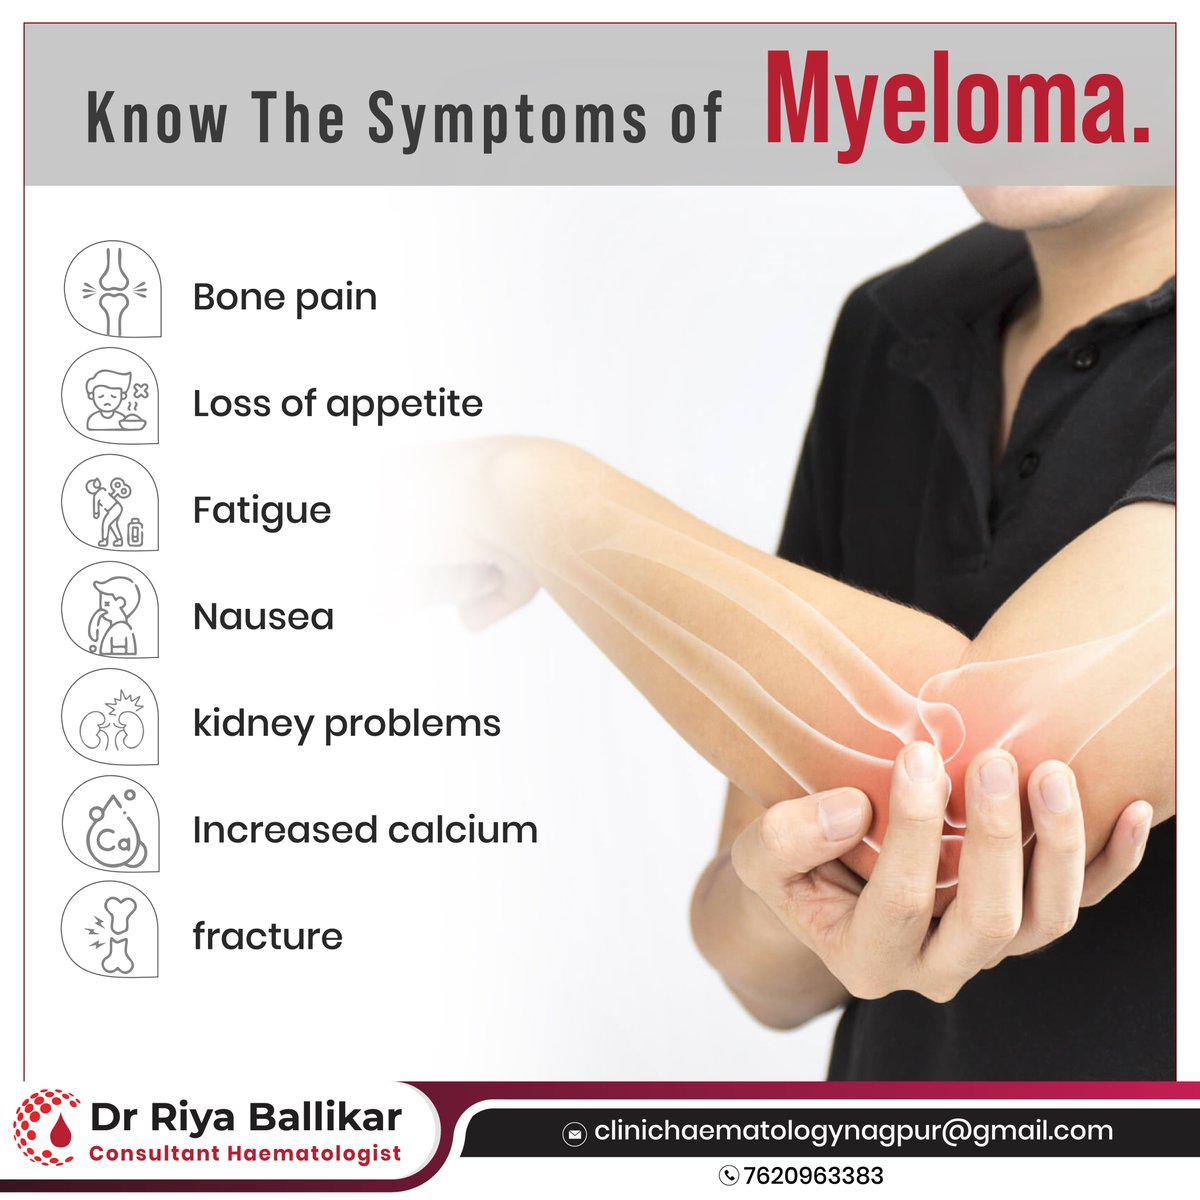 Know the Symptoms of Myeloma!
.
.
Suffering from blood-related diseases? Contact📞7620963383

#blood #bloodcancer #bloodcancerawareness #bloodcancertreatment  #haematology #haematologist #HematologyOncology #oncology #oncologist #consultanthaematologist  #anemia #anaemia #myeloma